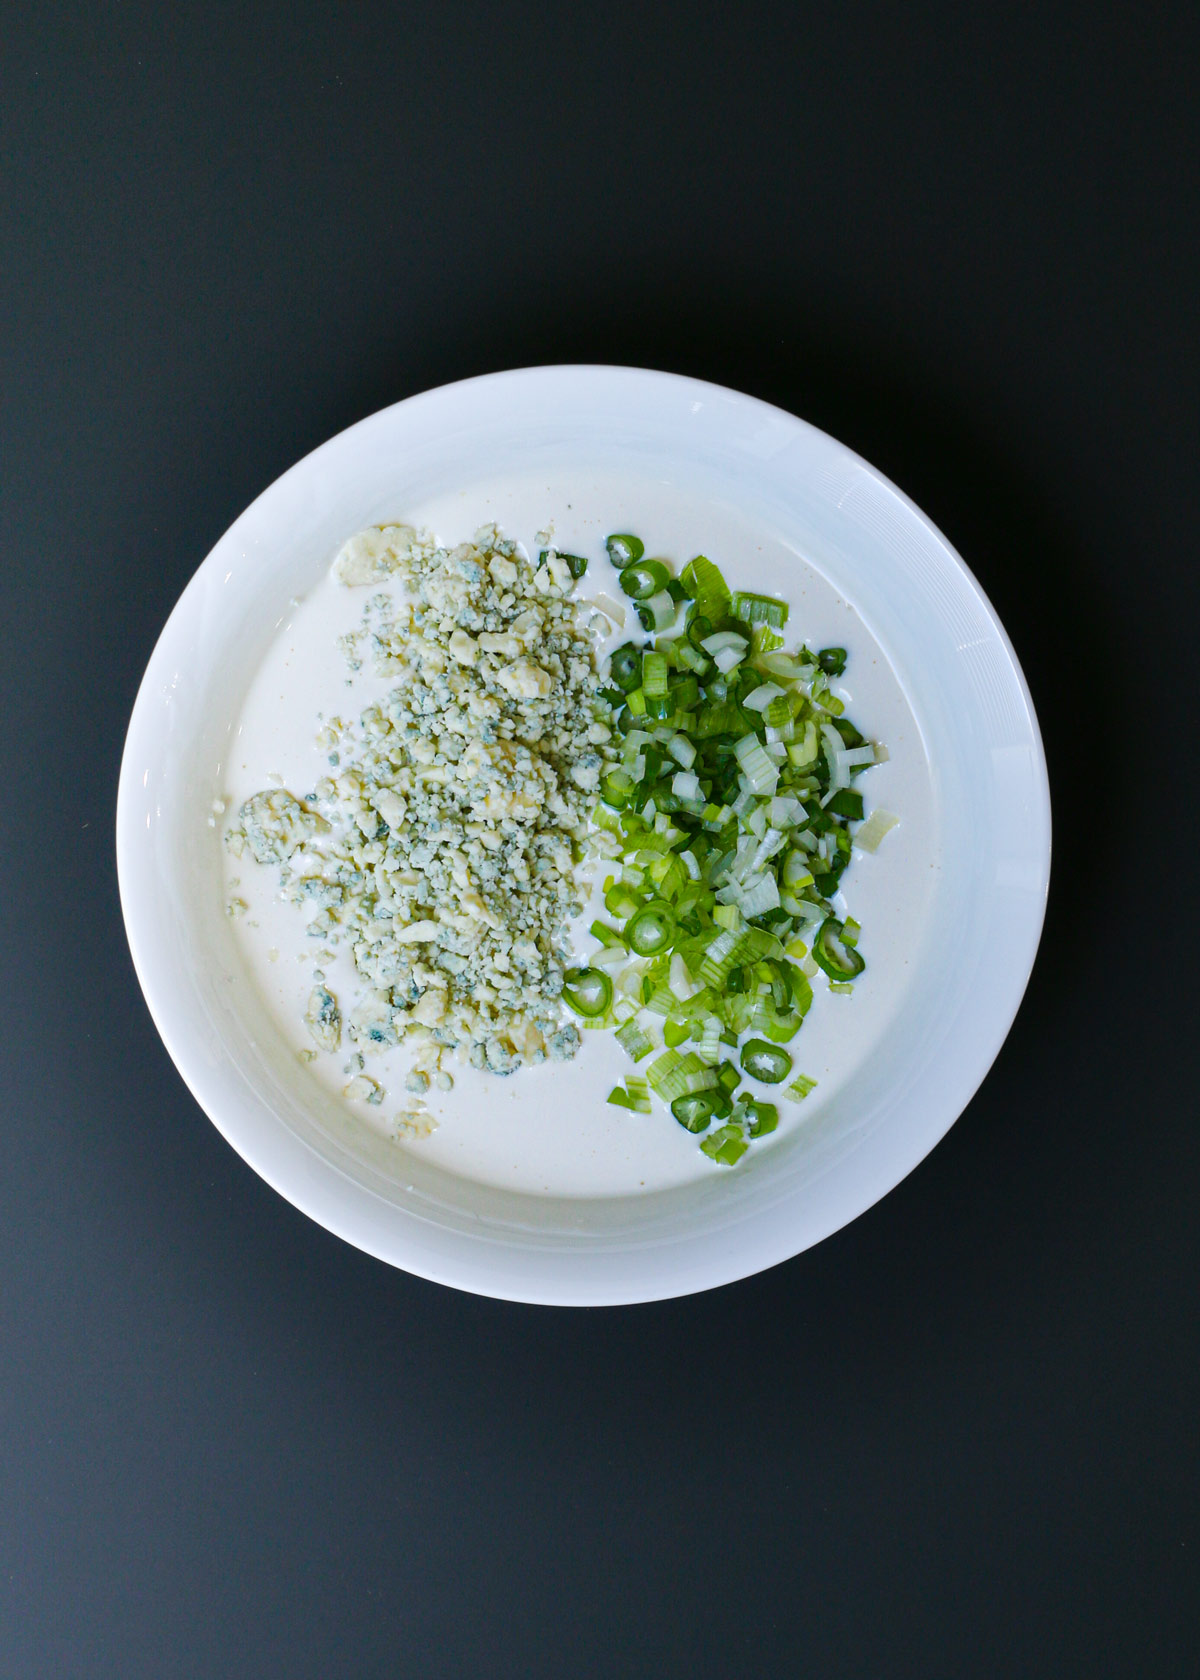 blue cheese crumbles and chopped green onion atop the surface of the buttermilk mixture.